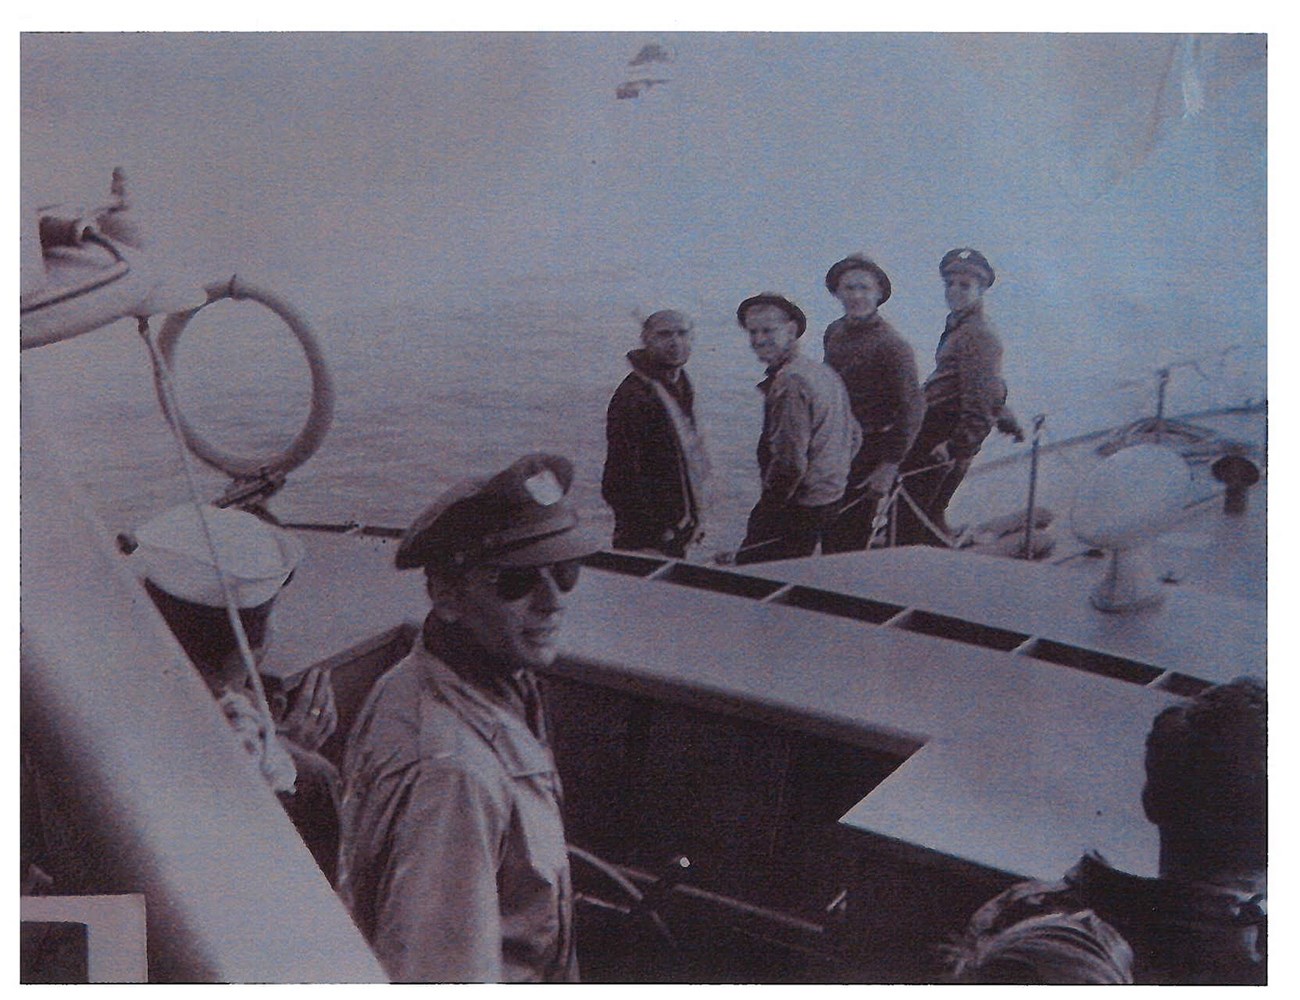 Black and white photo of seven men in uniform on a boat.